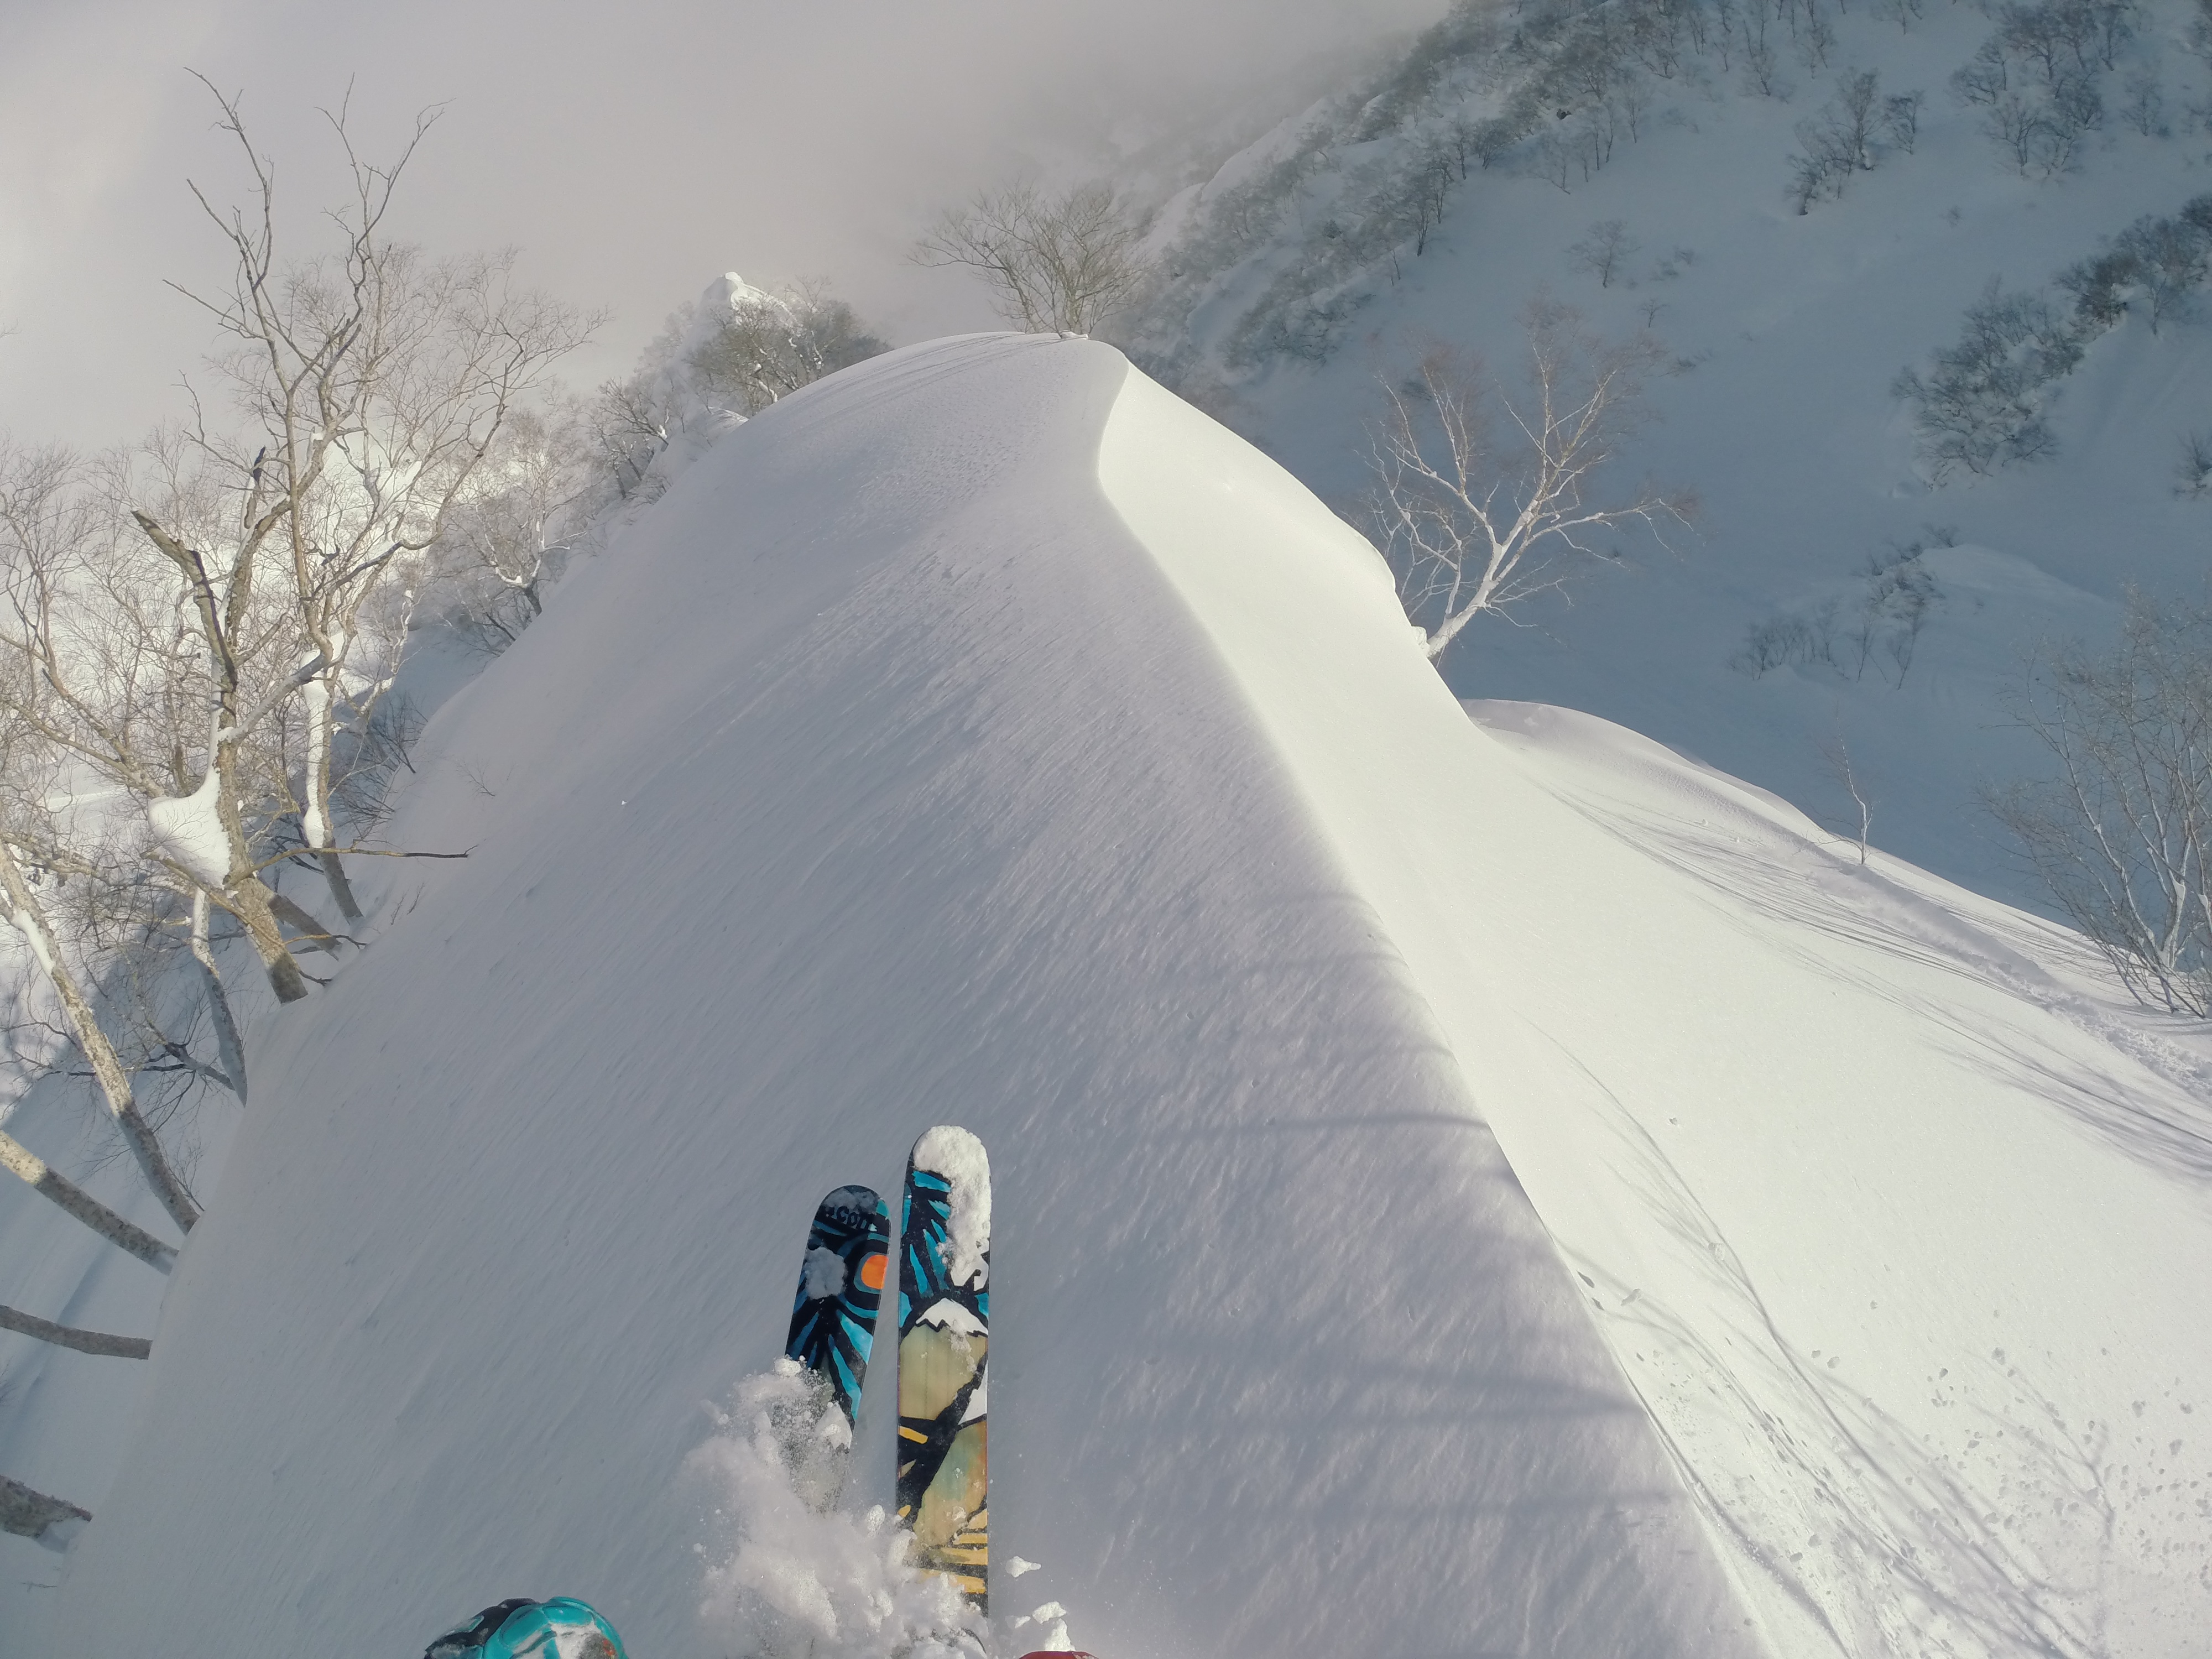 Air turn on a spine. Japan in January. photo: miles clark